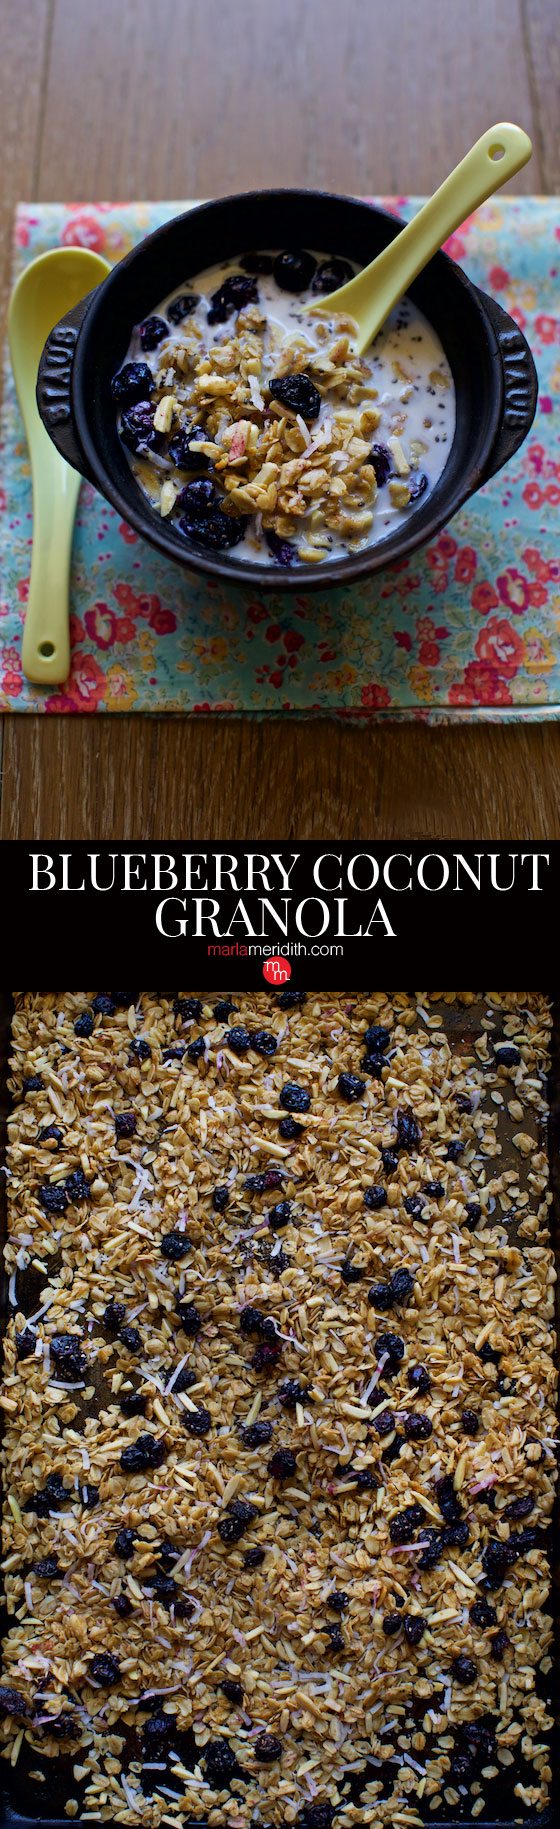 This Blueberry Coconut Granola recipe is a great for you on the go breakfast! MarlaMeridith.com ( @marlameridith )